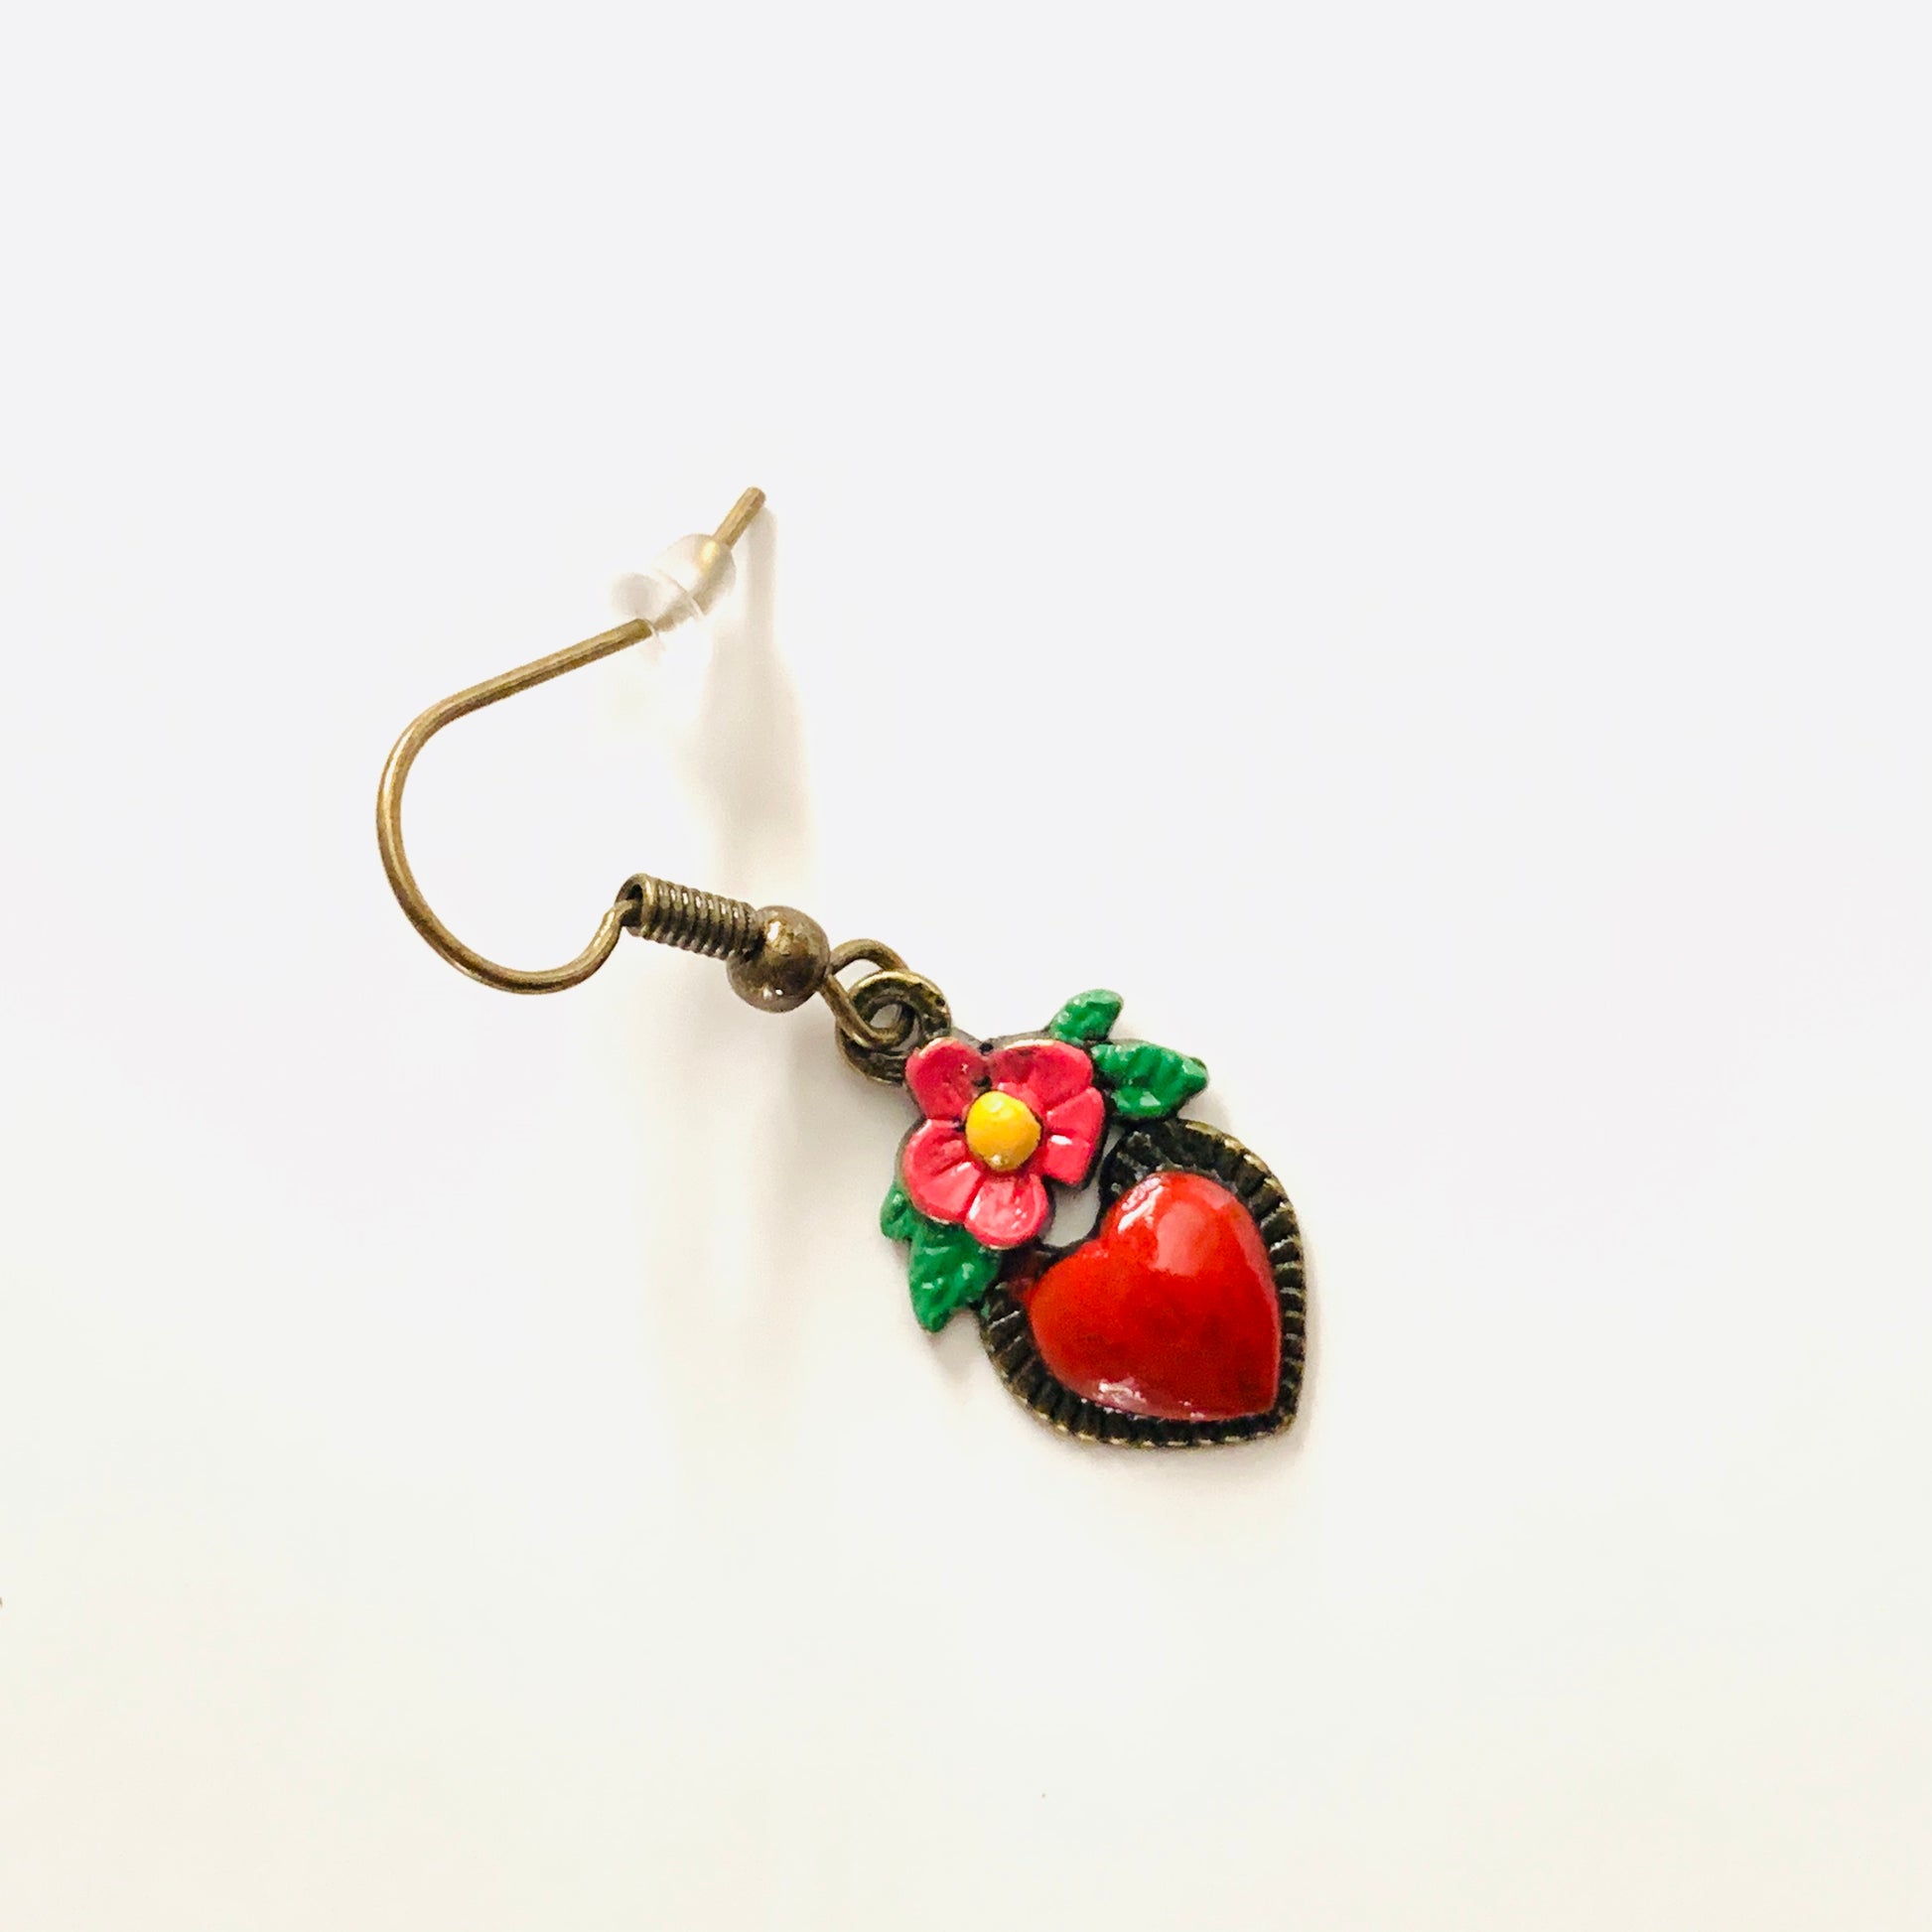 Bronze hand painted heart and flower earrings. Red, pink, green, and yellow paint. Mexican earrings. Mexican jewelry for fridamaniacs, fridalovers, fridamania. Frida Kahlo. Mother's Day gift.